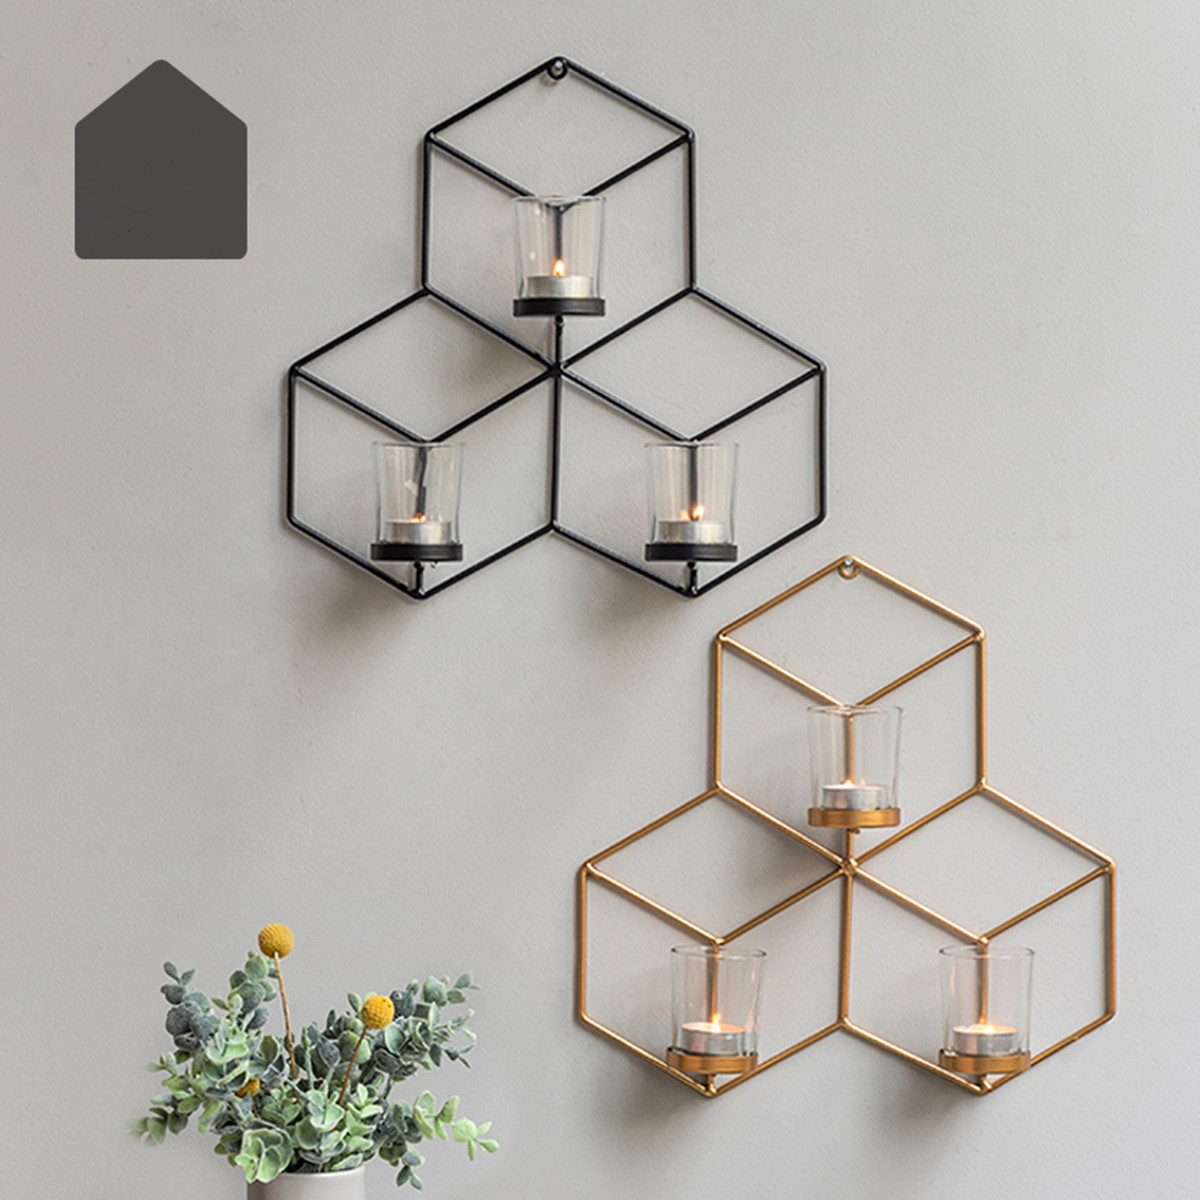 3D-Geometric-Nordic-Style-Candle-Holder-Iron-Candlestick-Handmade-Wall-Art-Room-Home-Decor-1390551-4